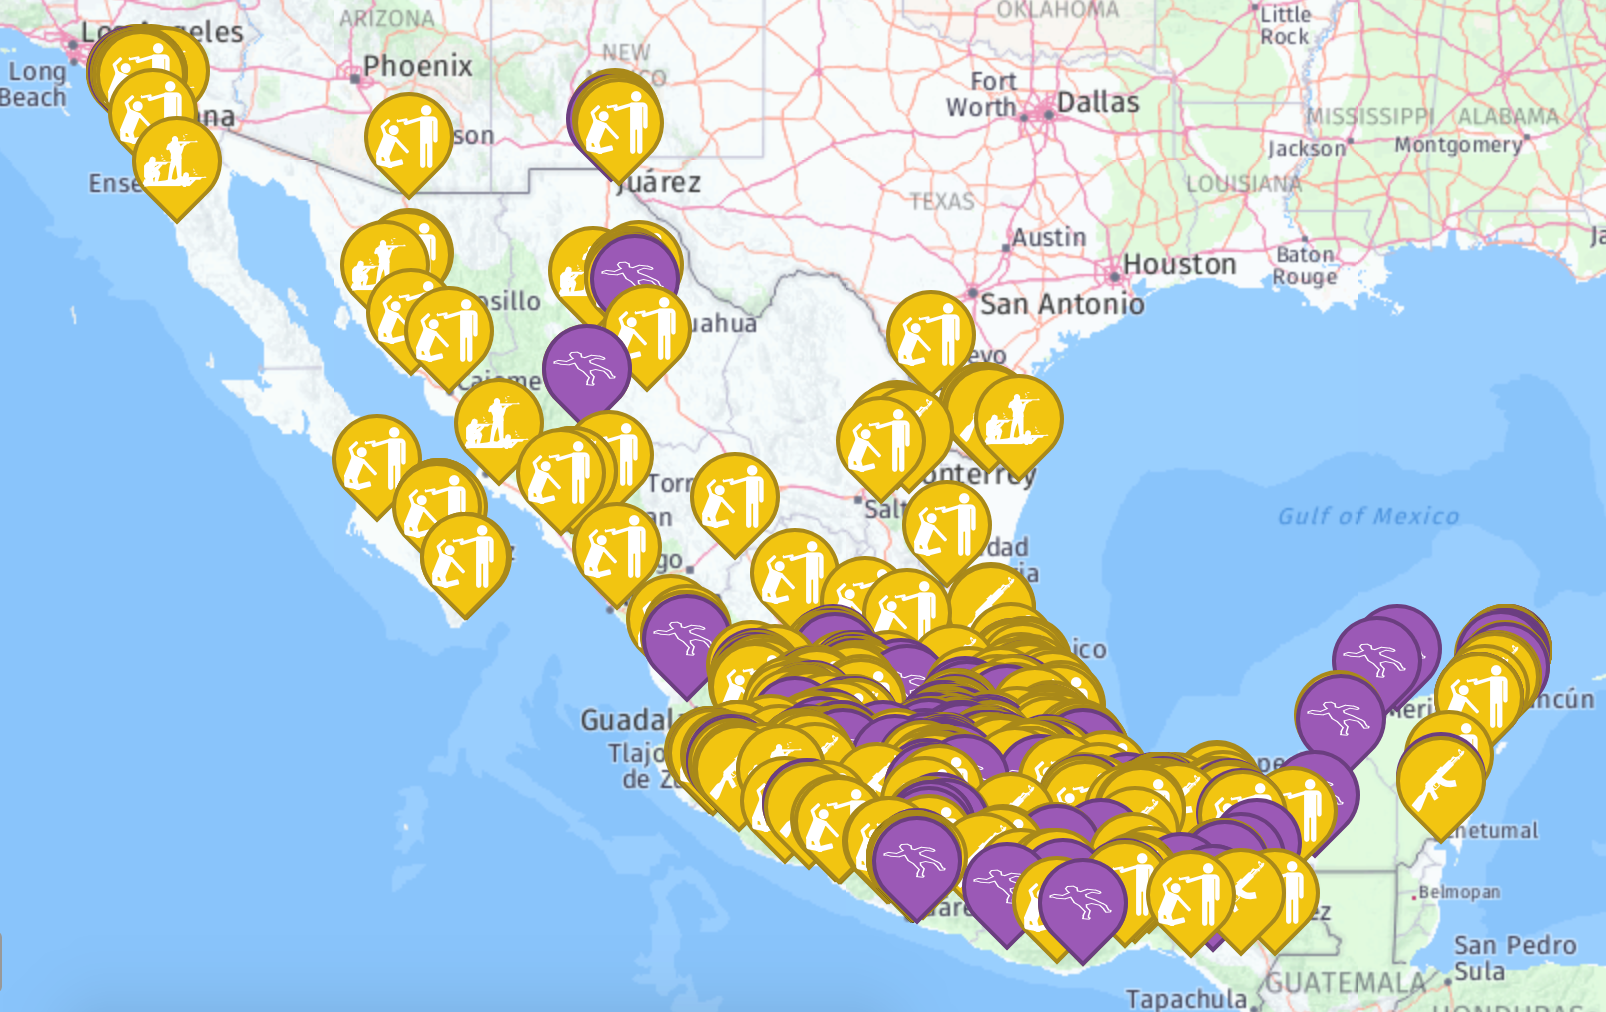 Executions, murders, skirmishes, and shootings recorded in Mexico in 2018 (Only shows 800 of 1800 incidents since January 1st 2018. Additionally, each icon represents an incident and not a victim. Some icons involve an incident with multiple casualties).